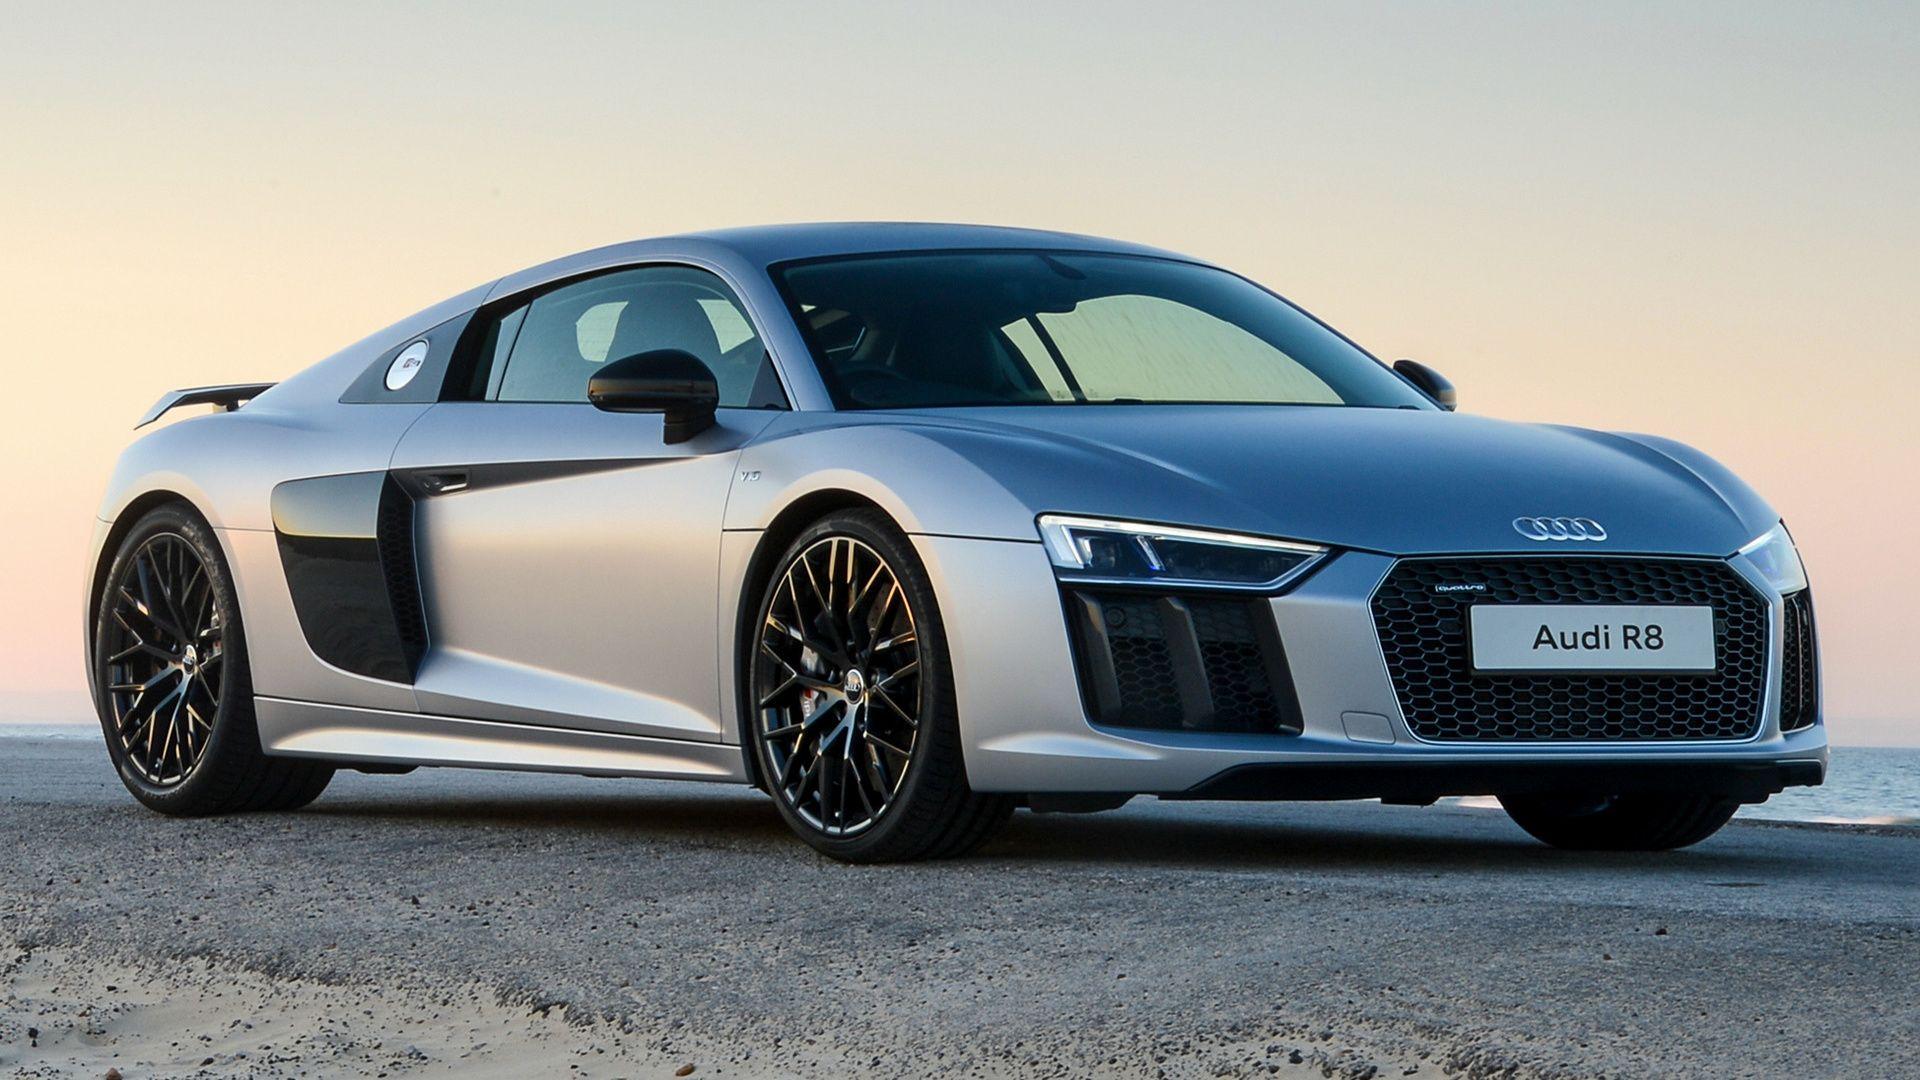 2016 Audi R8 Wallpapers Top Free 2016 Audi R8 Backgrounds Wallpaperaccess